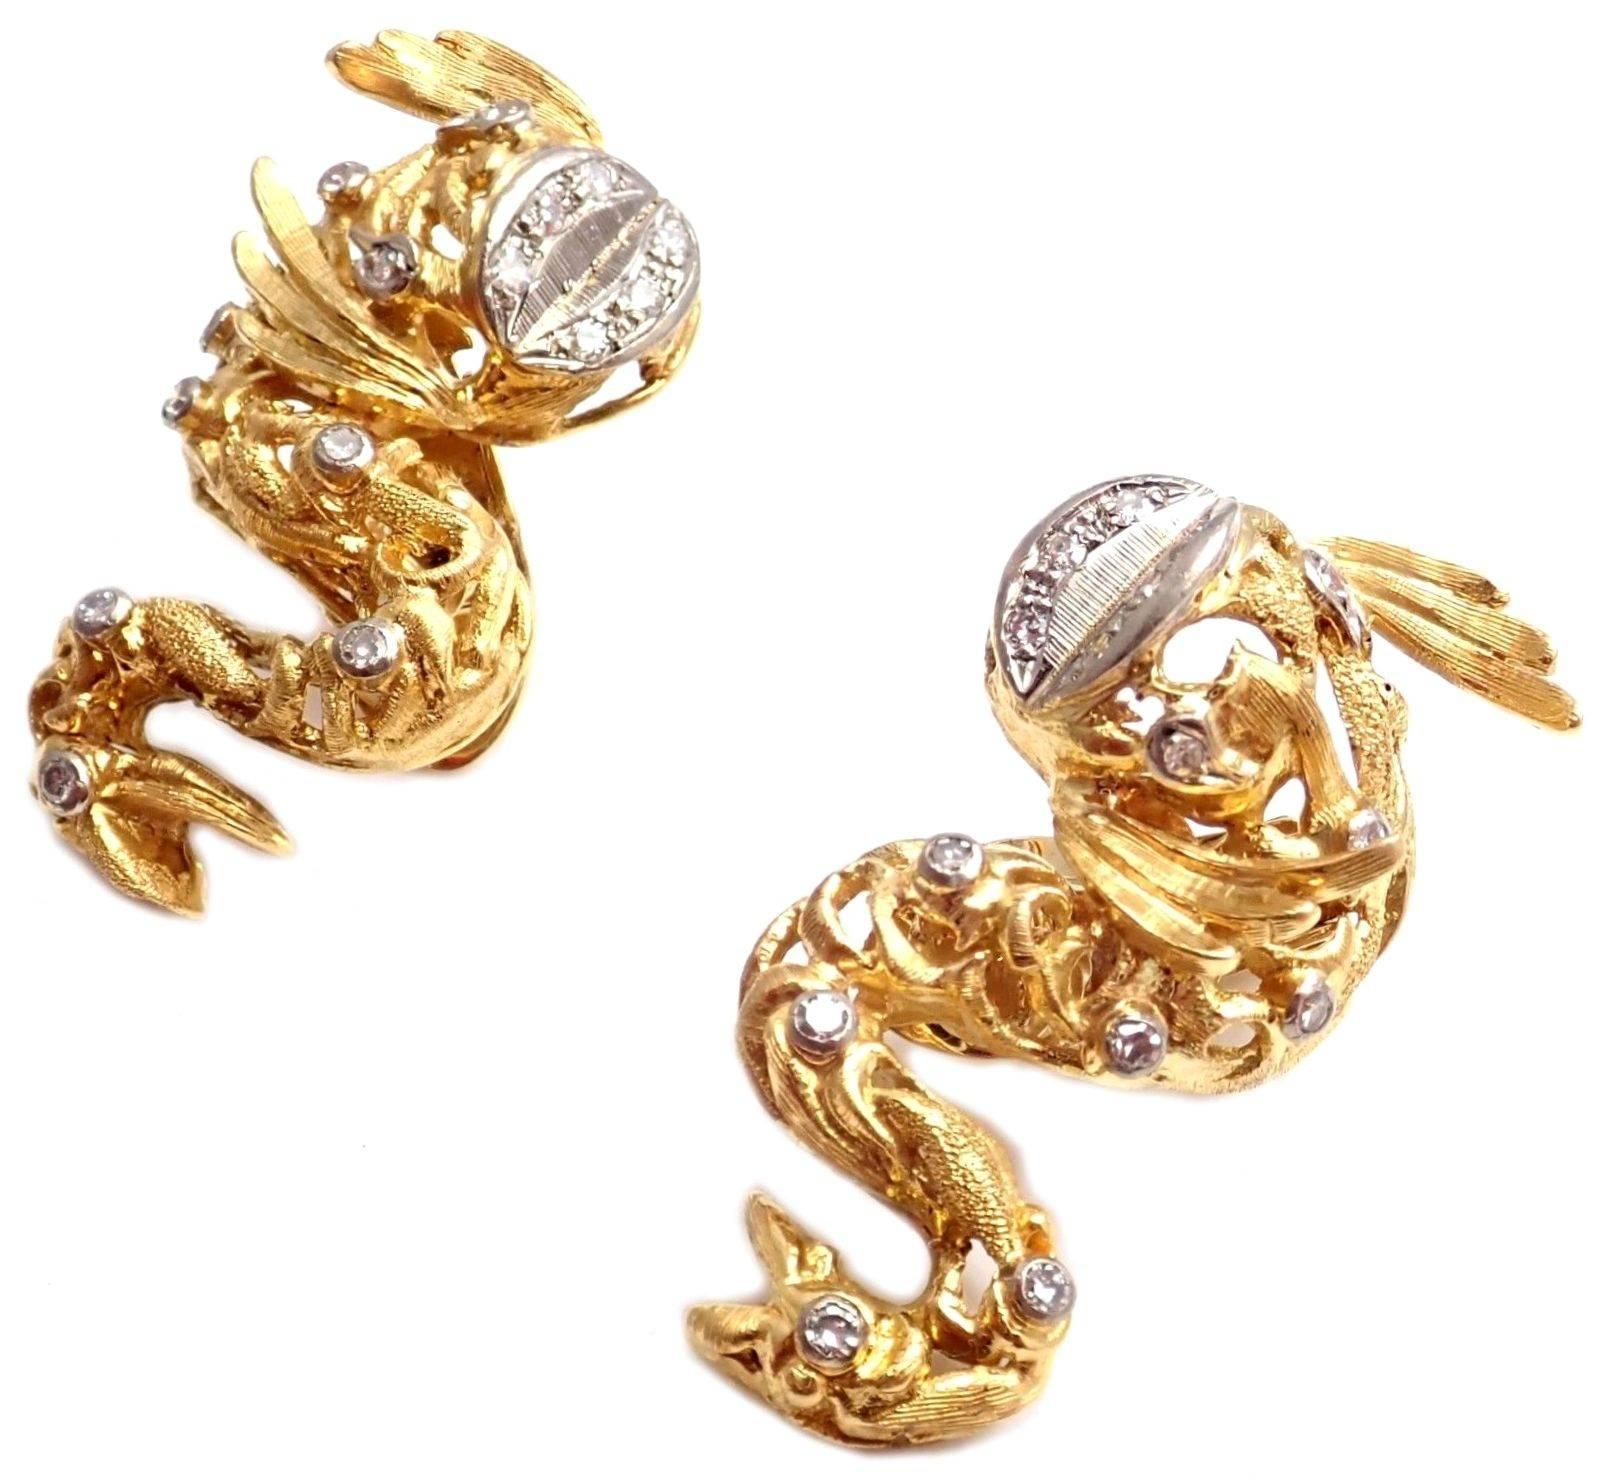 18k Yellow Gold Diamond FIsh Earrings by Illias Lalaounis Greece. 
With 30 round diamonds total weight apptox. 0.60ctw
These earrings are made for pierced ears.
Details: 
Measurements: 17mm x 34mm
Weight: 22.3 grams
Stamped Hallmarks: ILalaounis A21